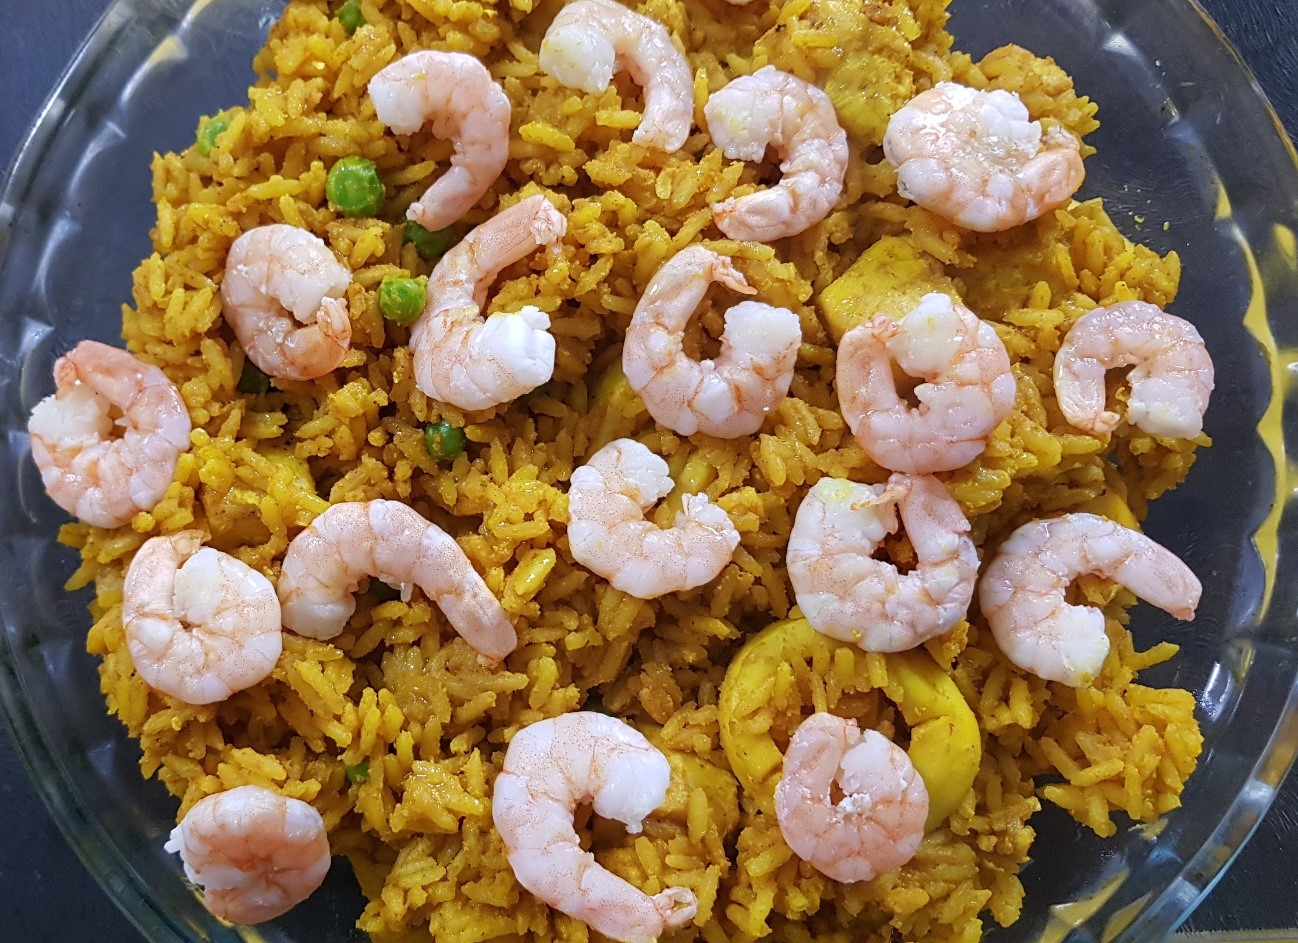 A close-up of the shrimp Paella being prepared